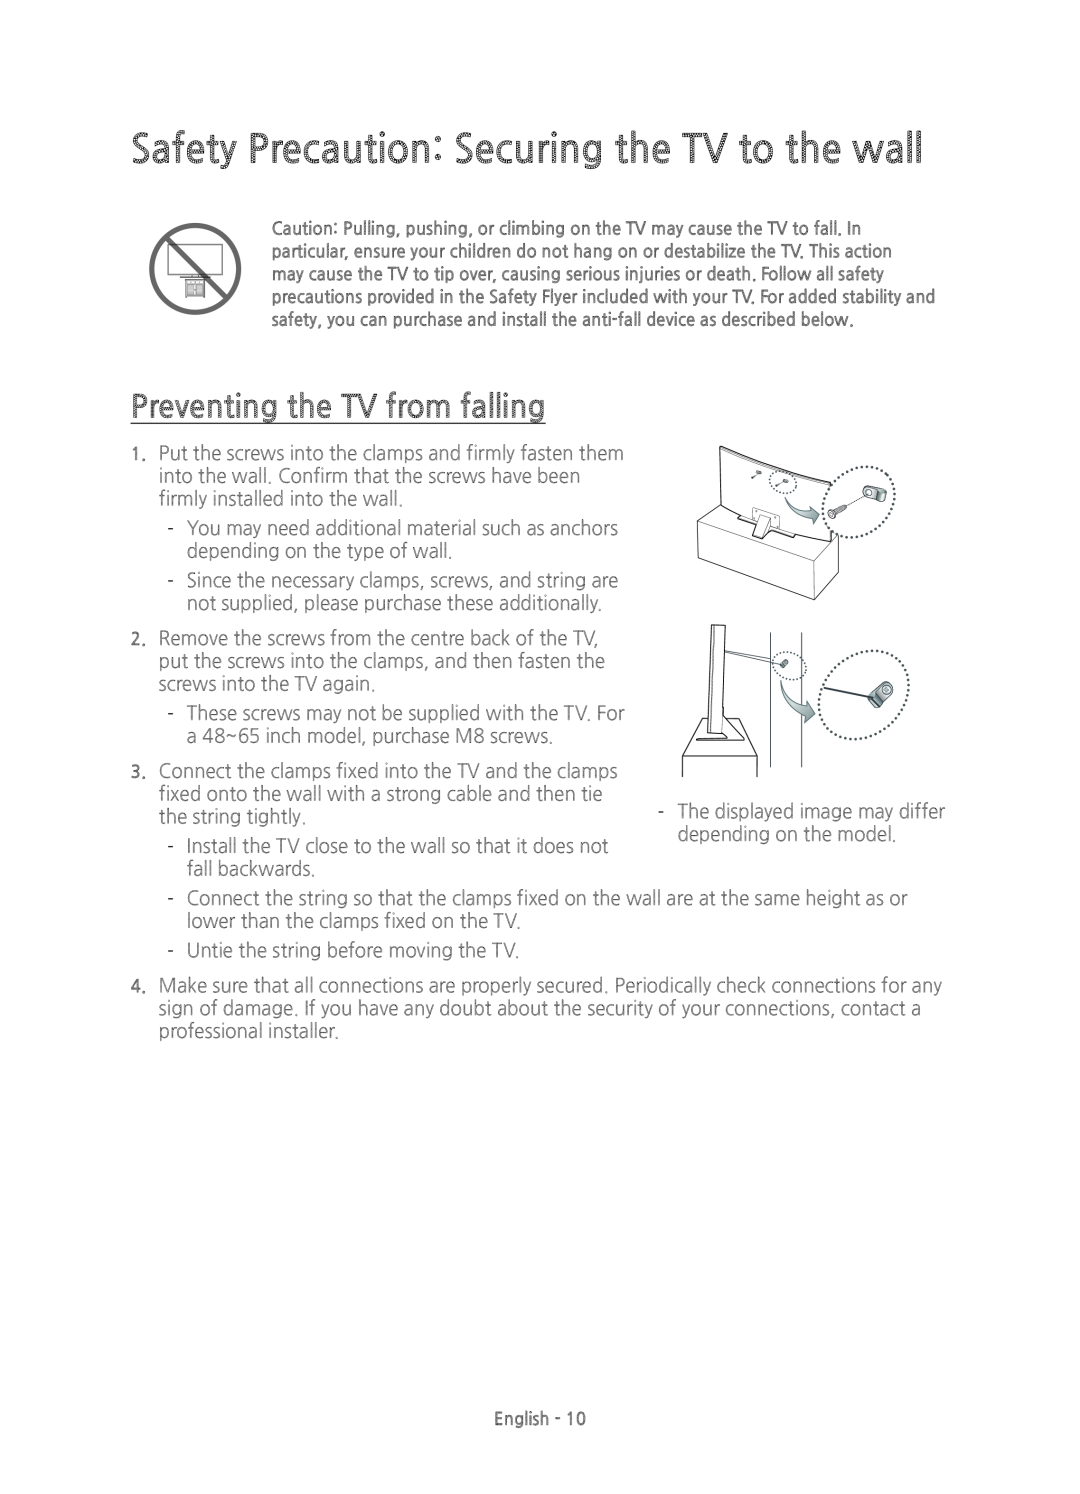 Samsung UE48JS8500TXZF, UE48JS8500TXXC manual Safety Precaution Securing the TV to the wall, Preventing the TV from falling 